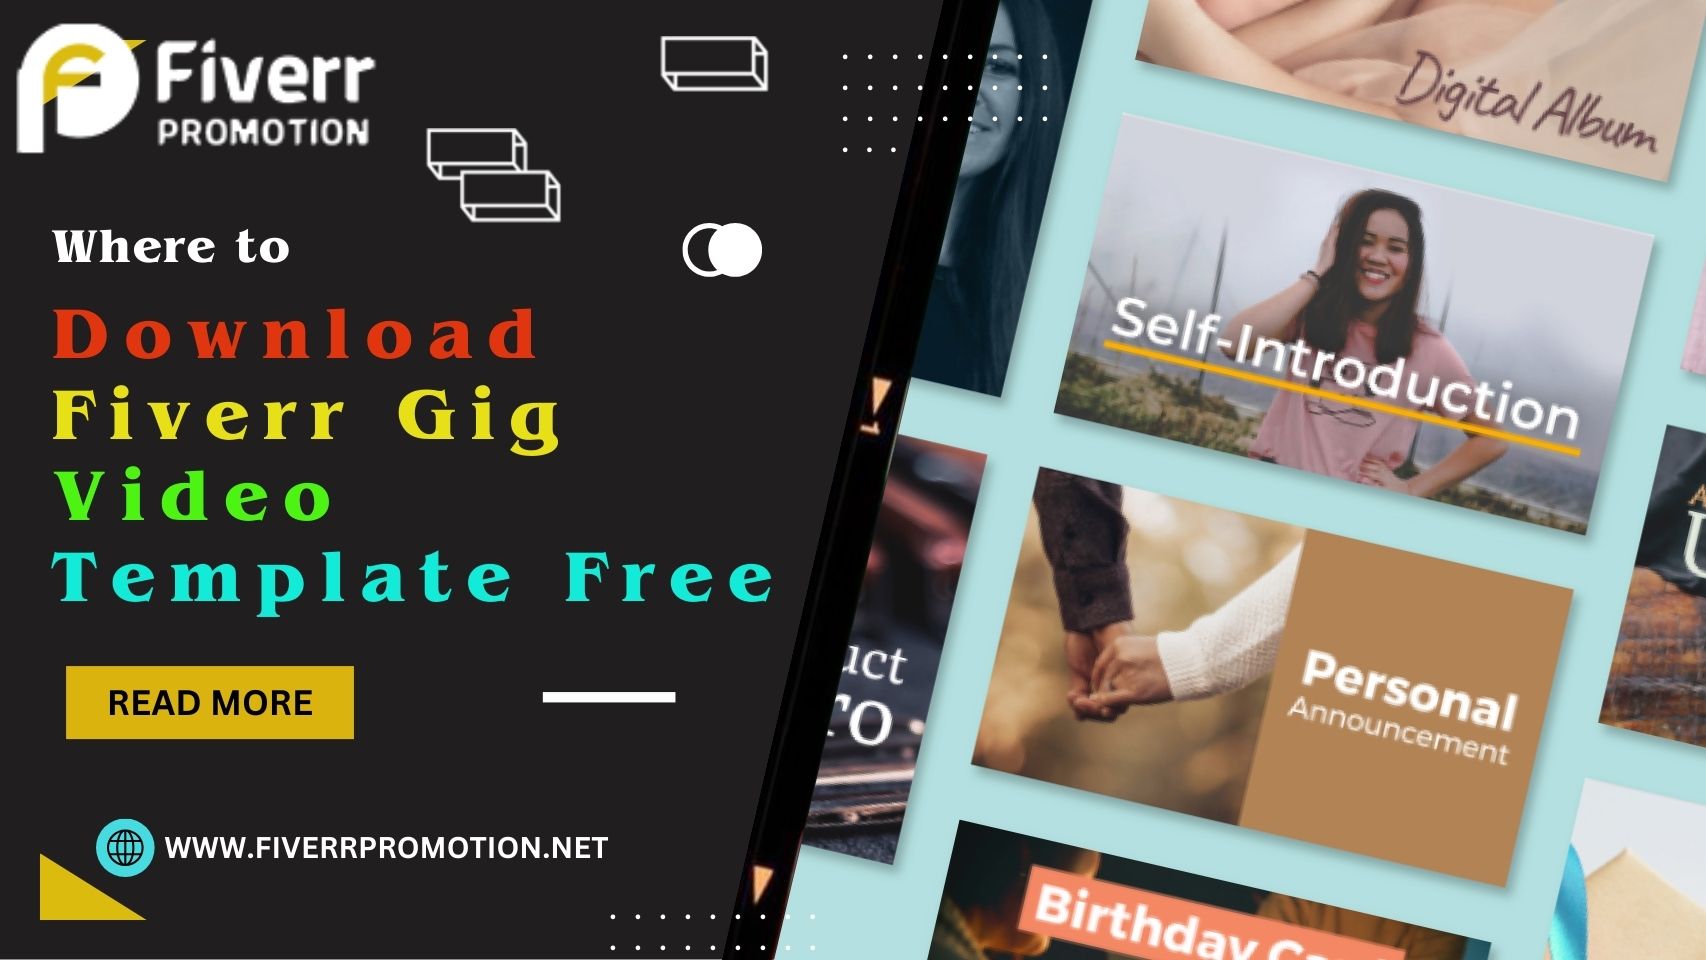 Where to Download Fiverr Gig Video Template Free